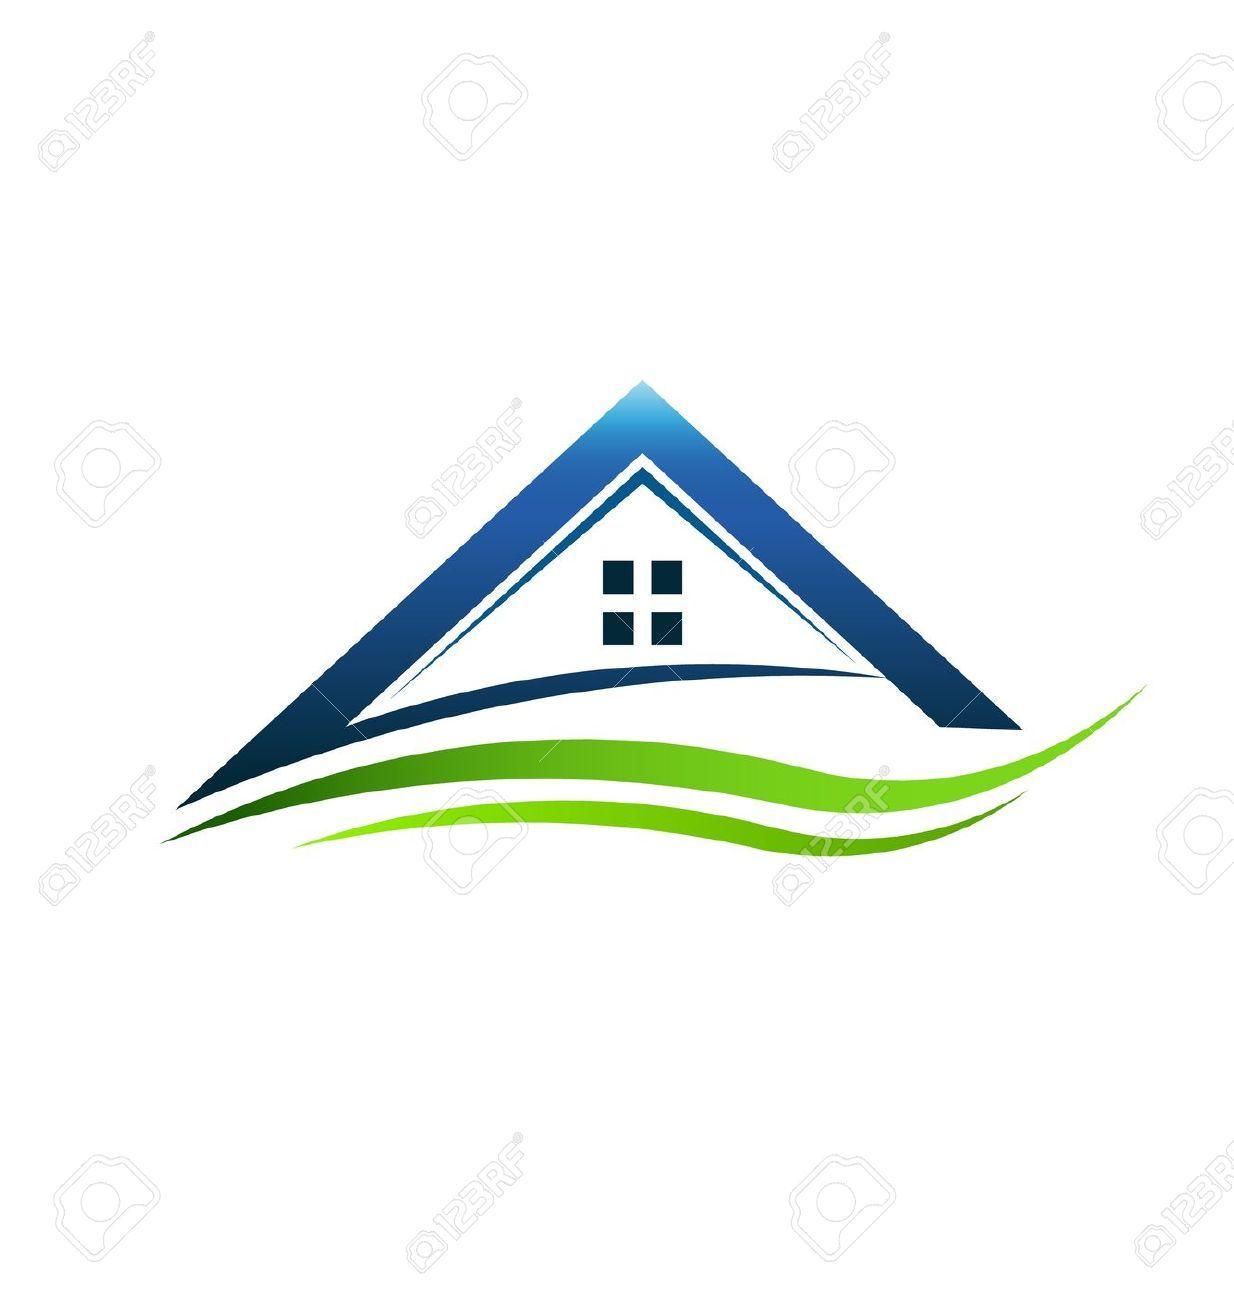 Roof Vector Logo - House Roof Vector at GetDrawings.com | Free for personal use House ...